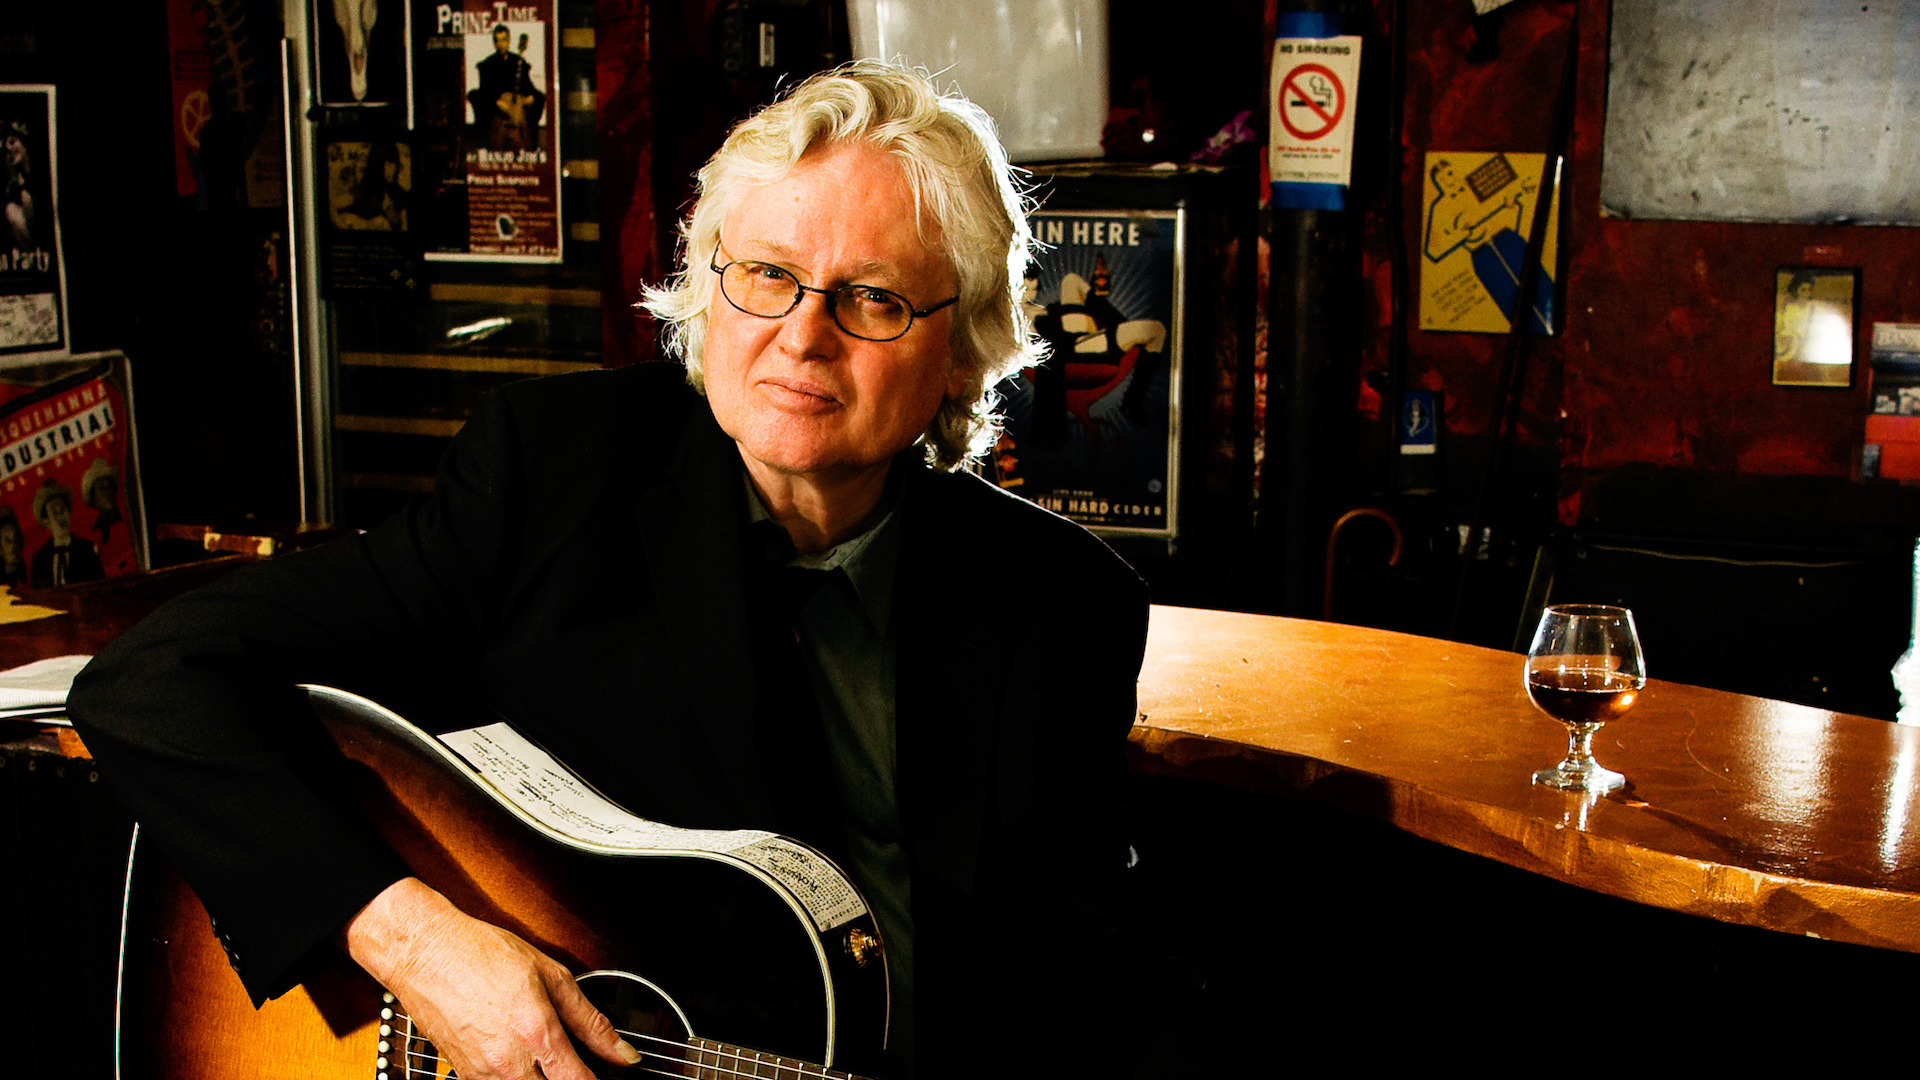 Top TV Song Last Week: On the Radio by Chip Taylor - Tunefind